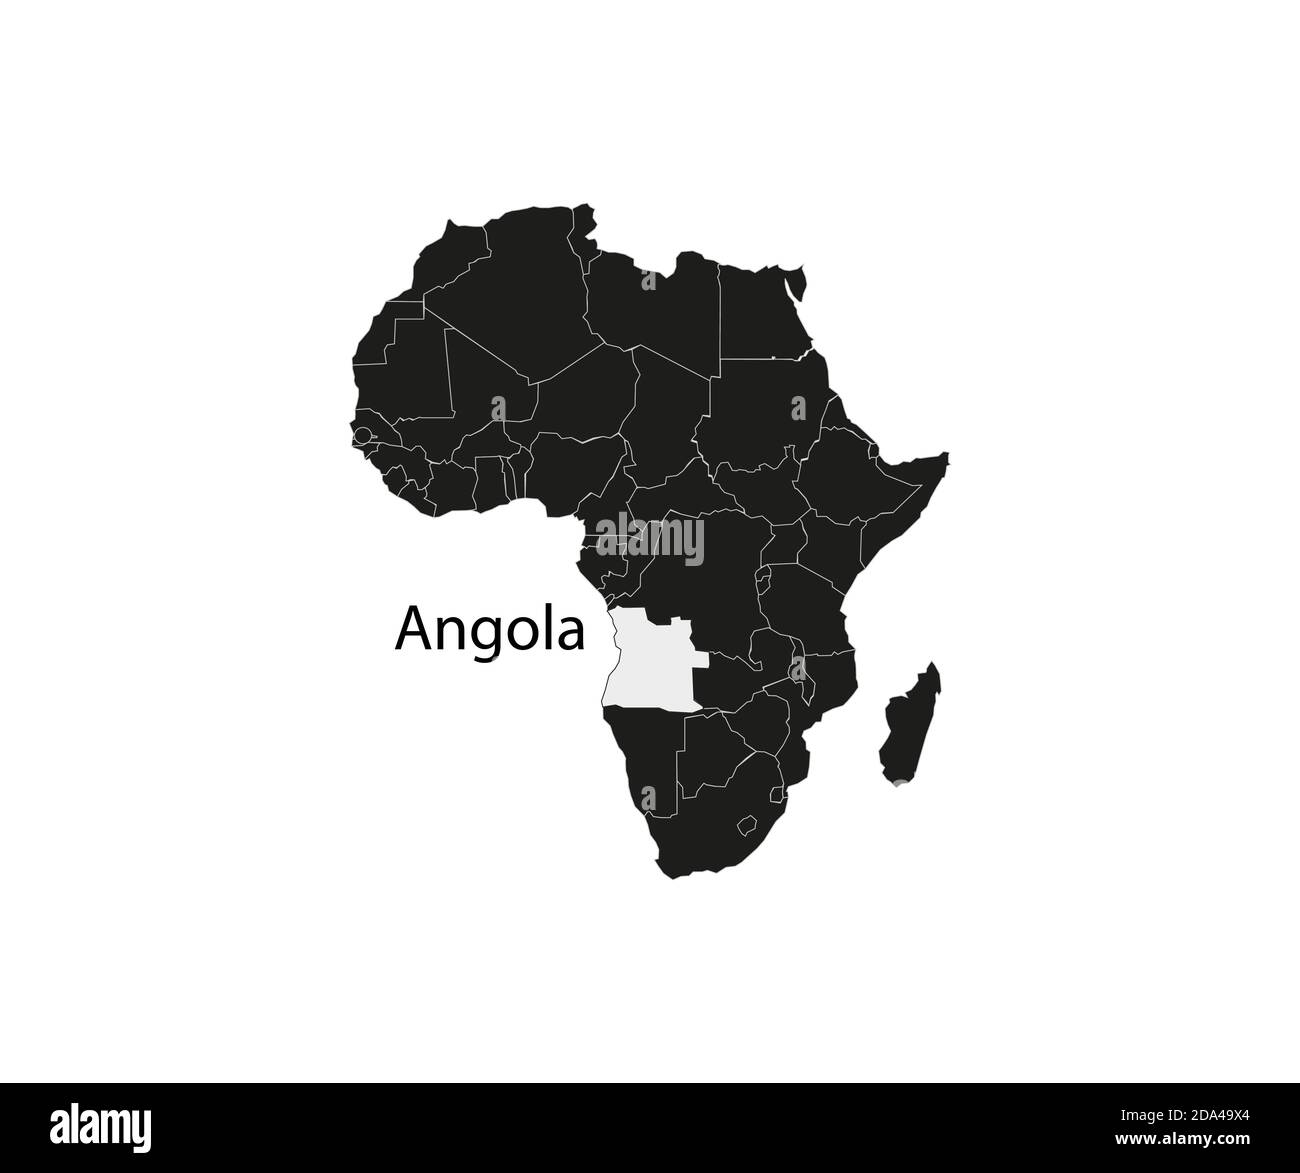 Angola on africa map vector. Vector illustration. Stock Vector